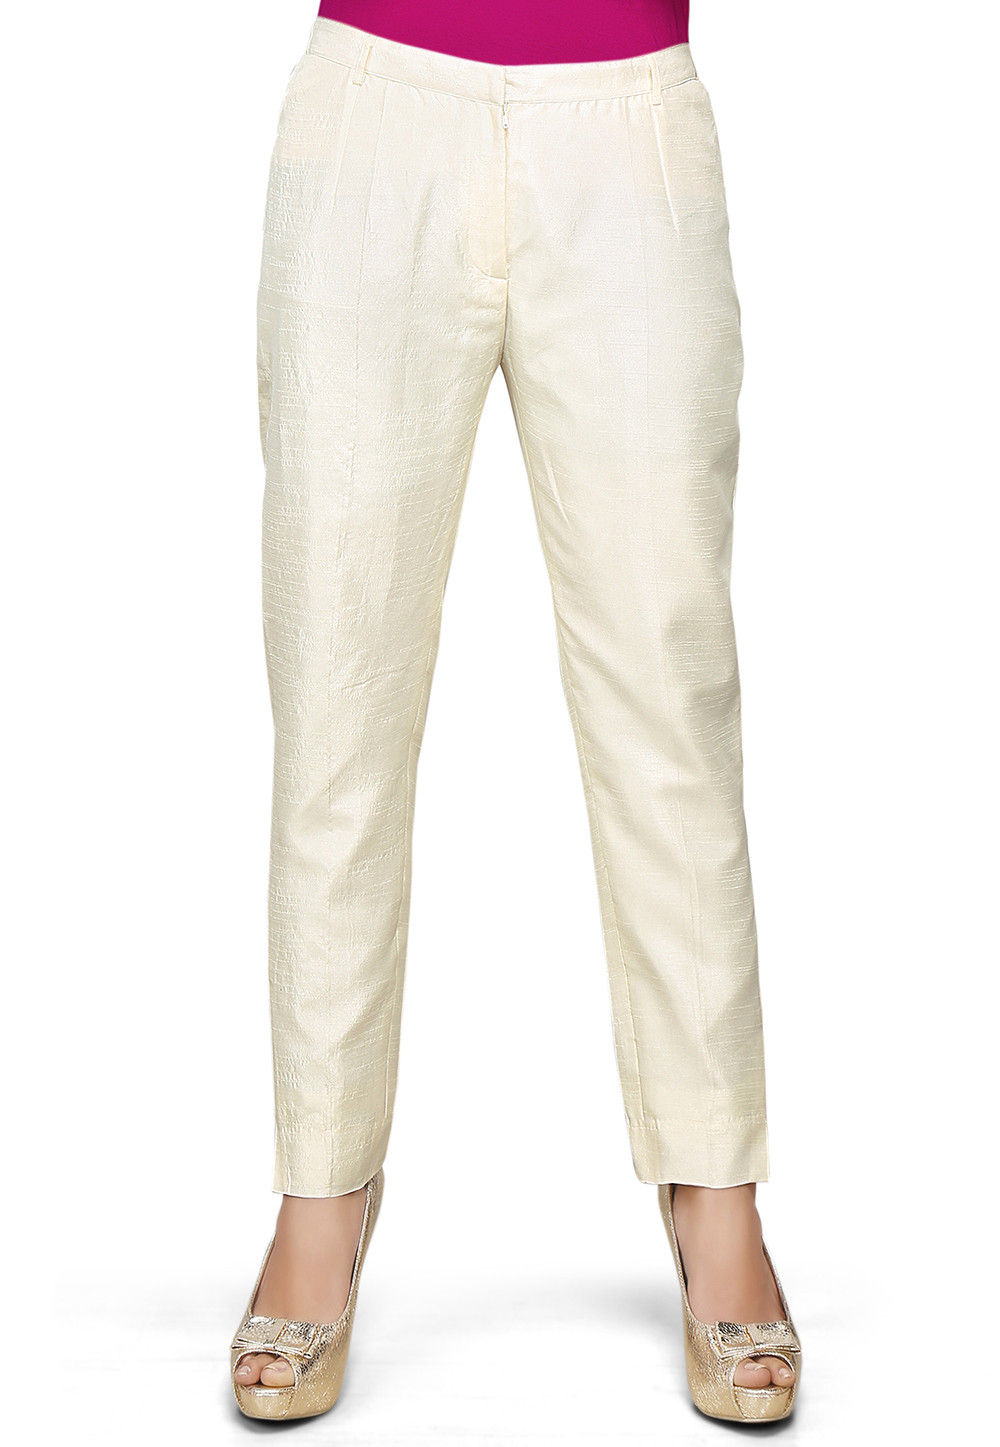 Off white straight pants with scalloped embroidery at bottom hem  Kora  India